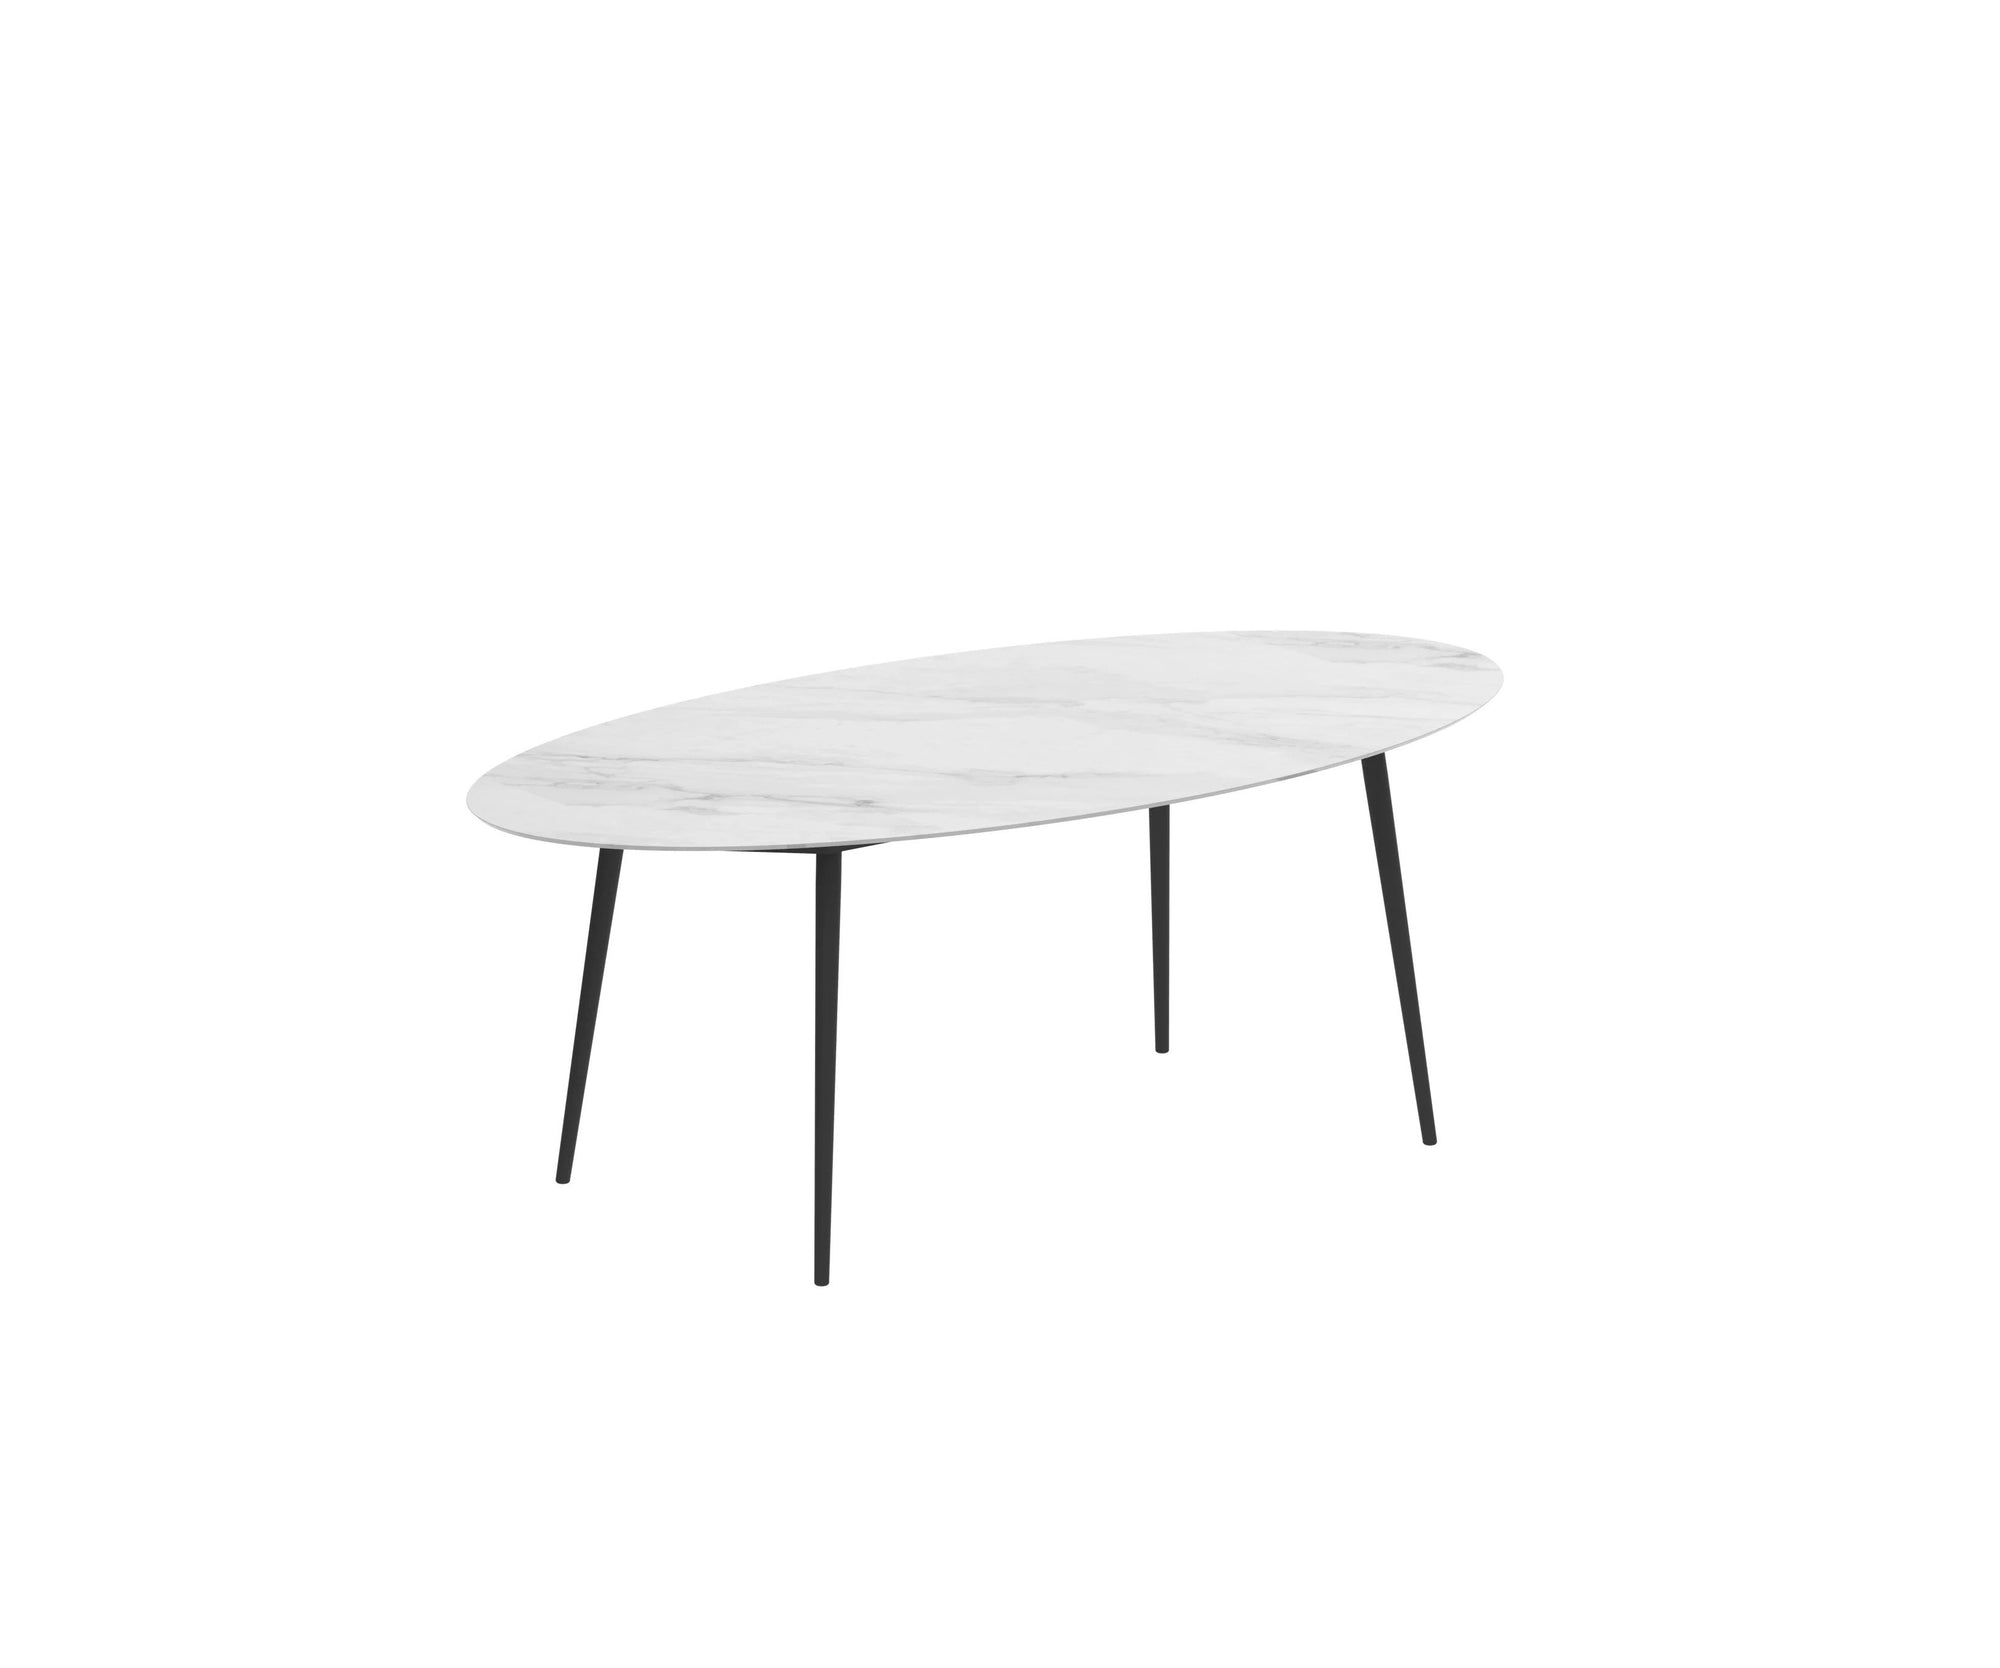 Styletto Oval Dining Table | Royal Botania